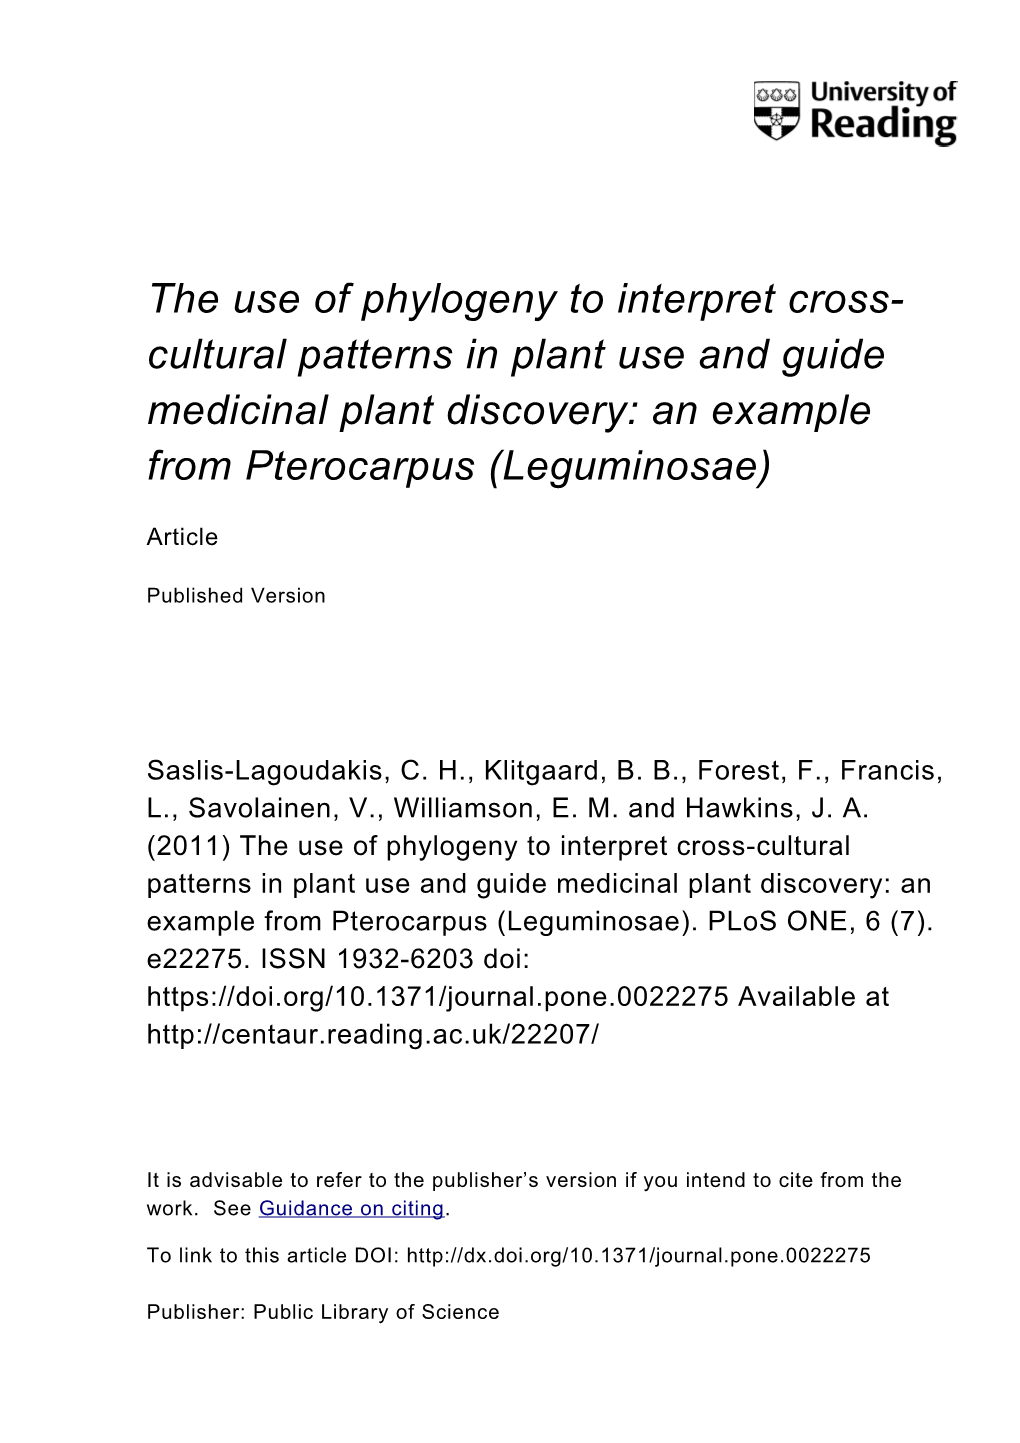 The Use of Phylogeny to Interpret Cross- Cultural Patterns in Plant Use and Guide Medicinal Plant Discovery: an Example from Pterocarpus (Leguminosae)